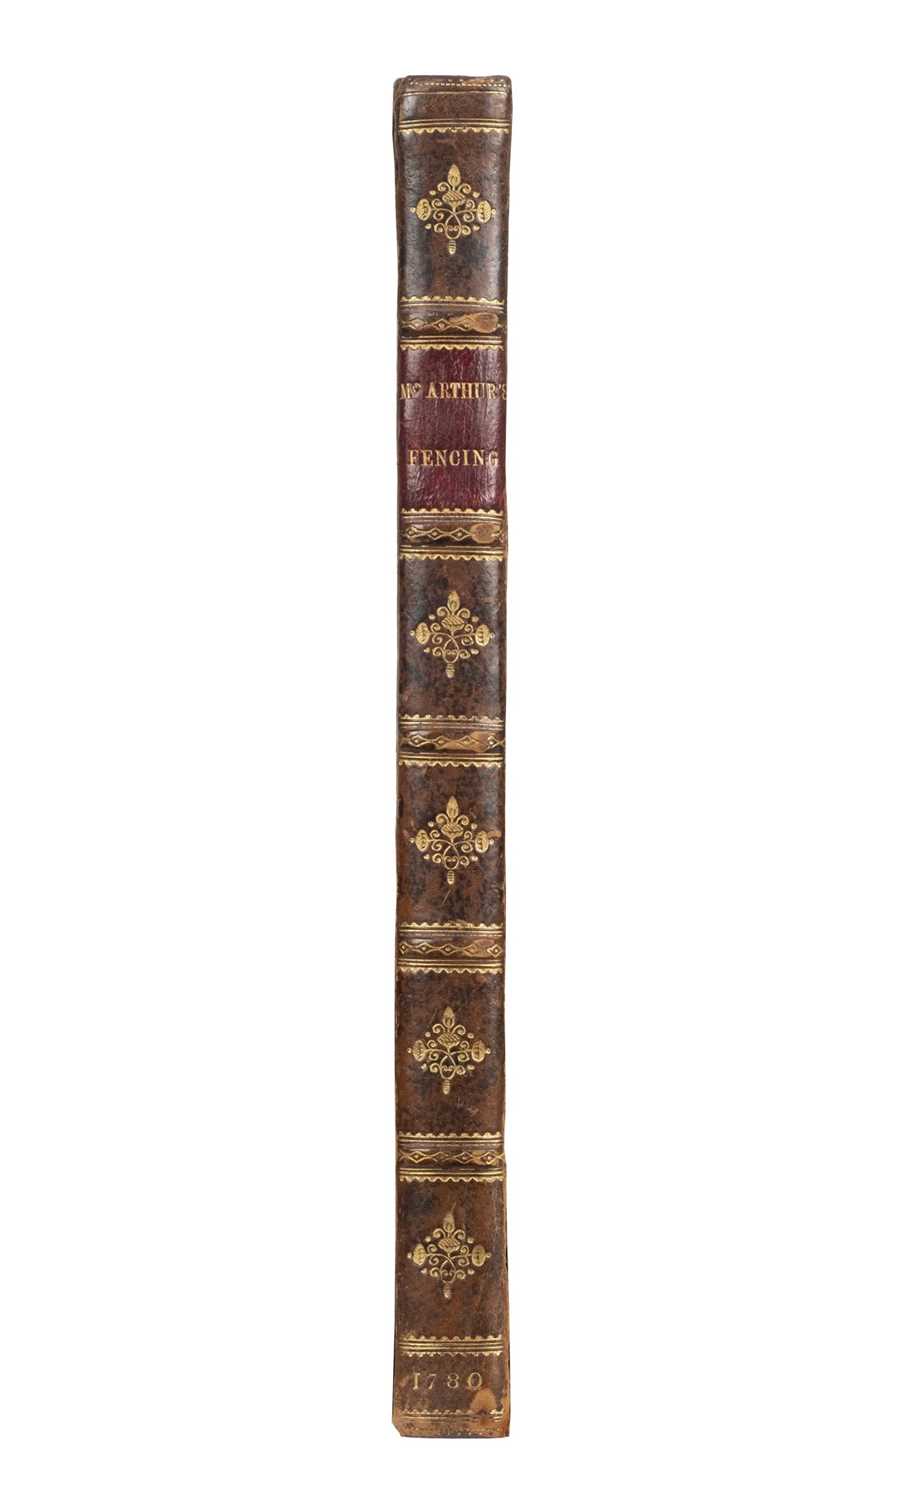 Lot 467 - McArthur (John). A New and Complete Treatise on the Theory and Practice of Fencing, 1st ed., [1780]